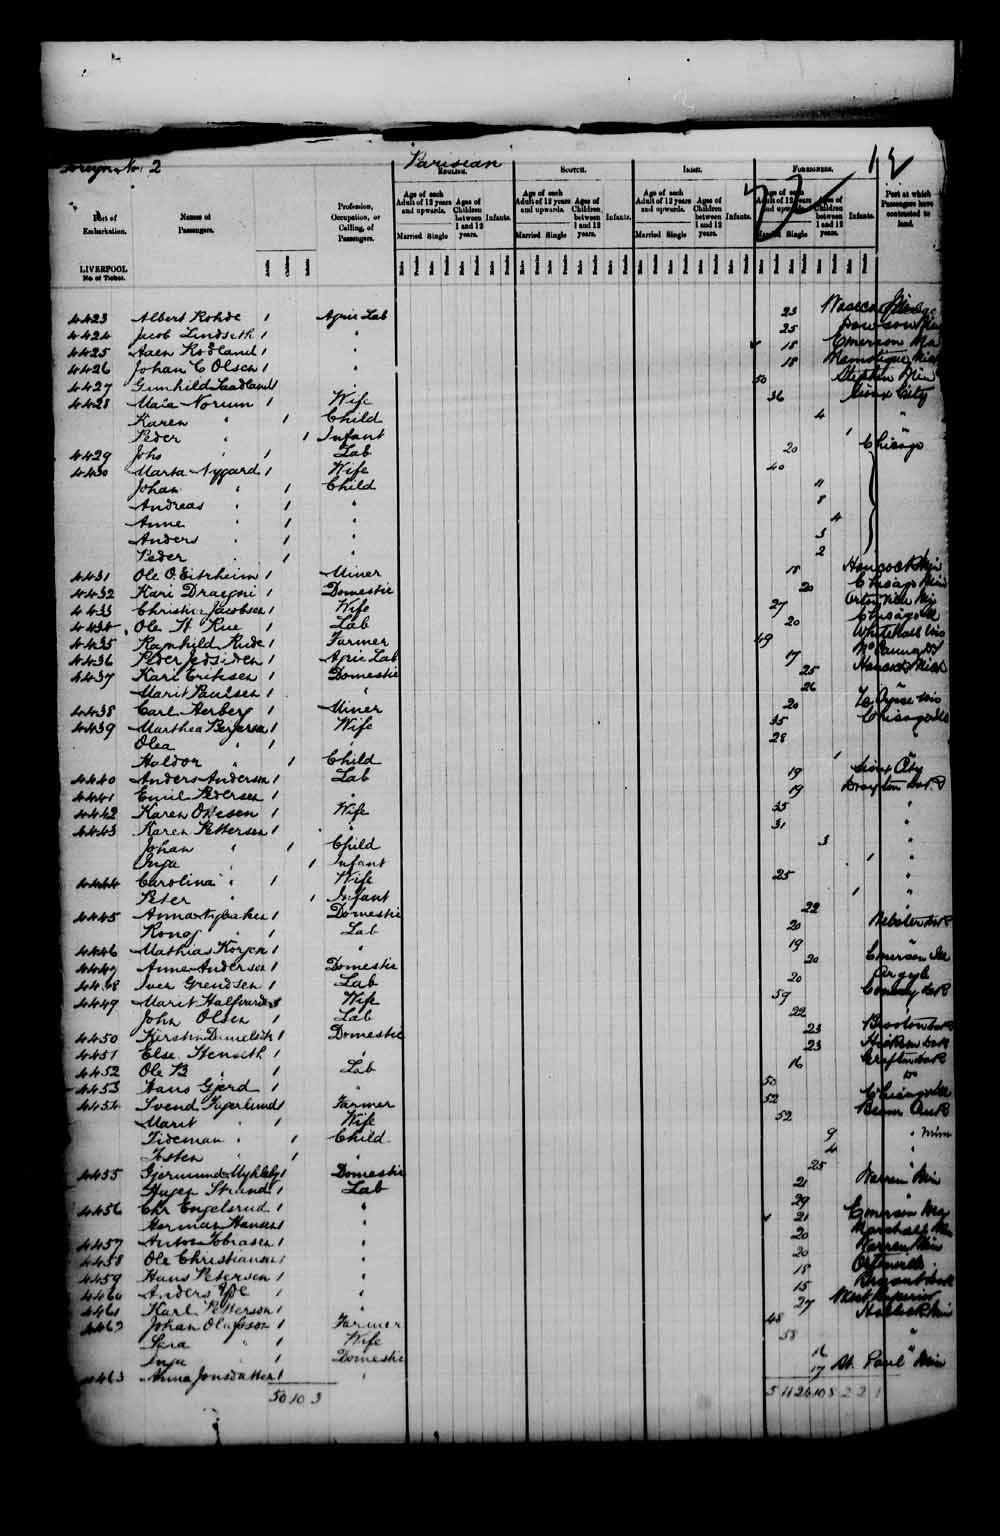 Digitized page of Passenger Lists for Image No.: e003549669